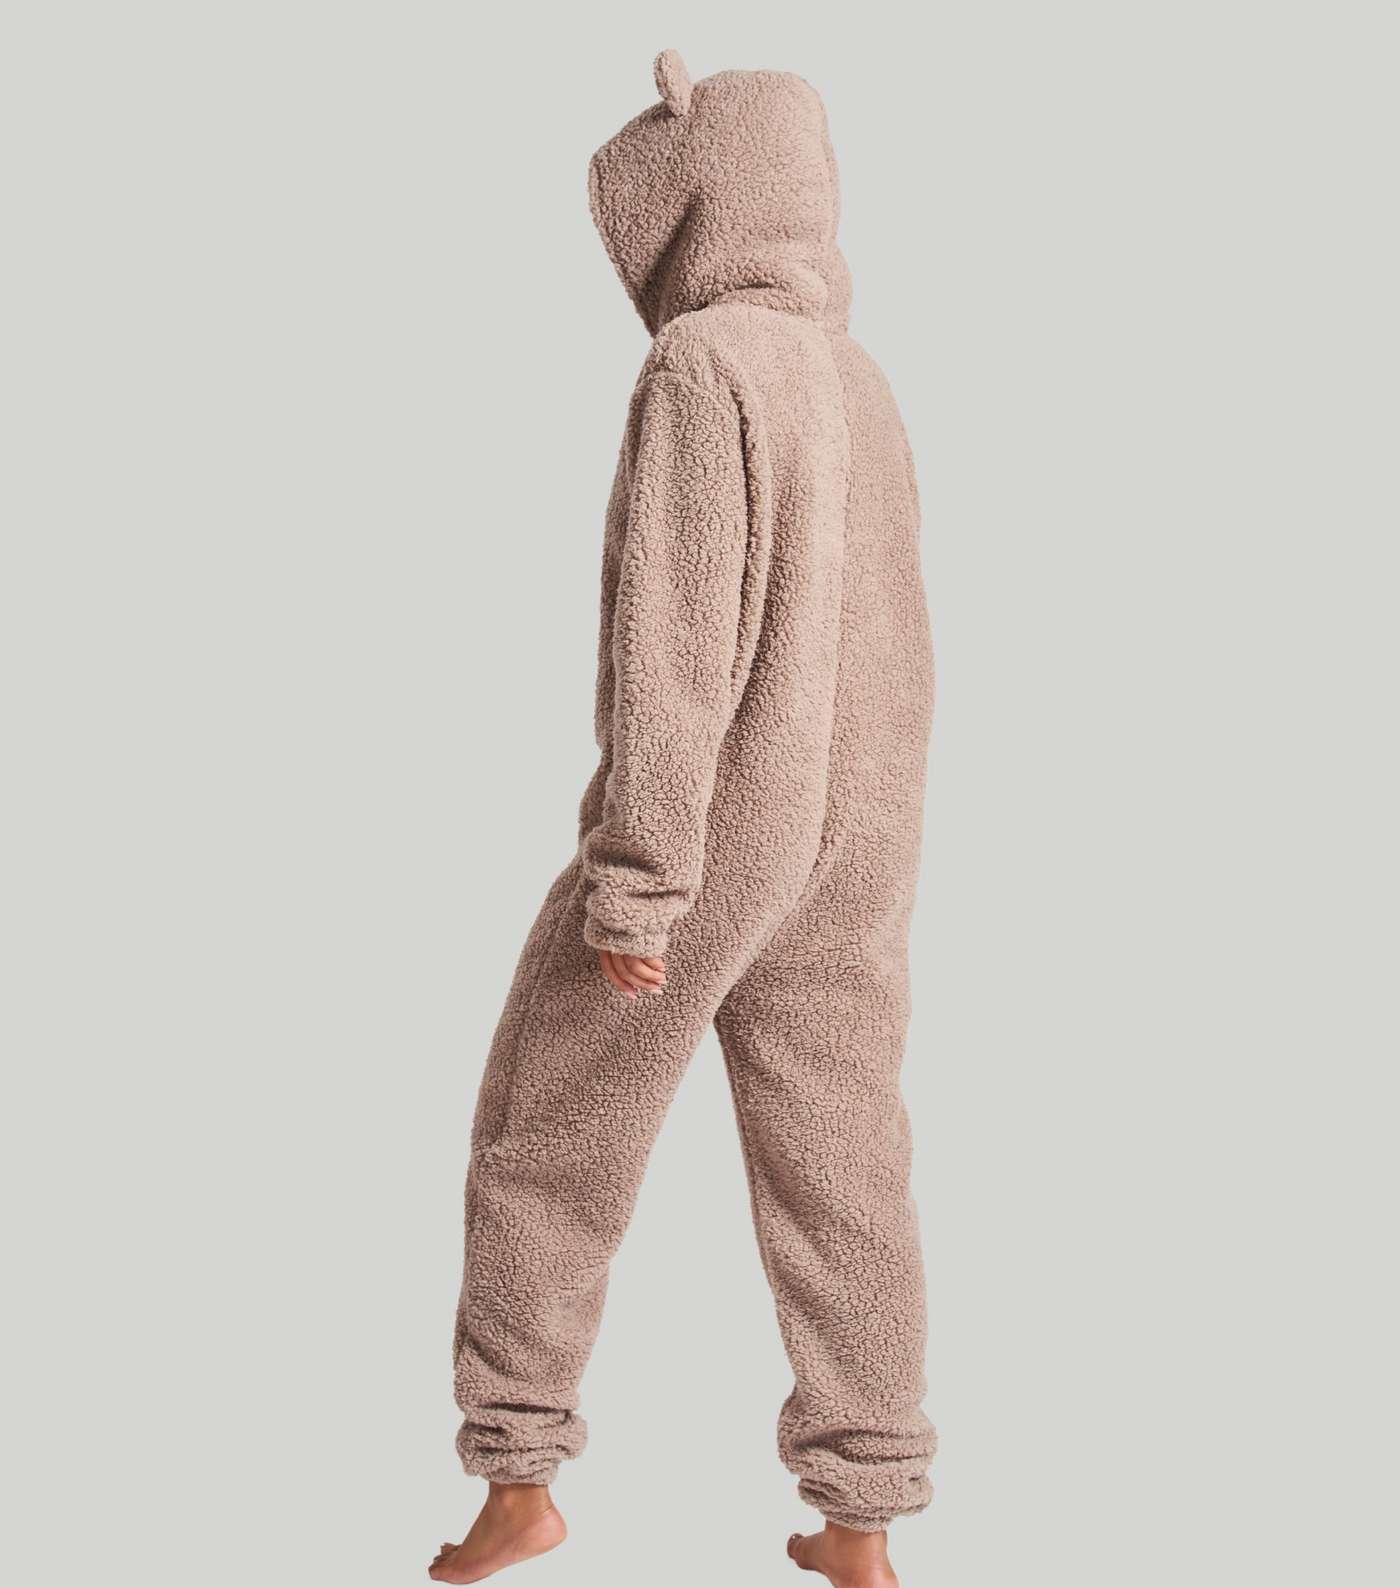 Loungeable Light Brown Borg Onesie with Ears Image 5